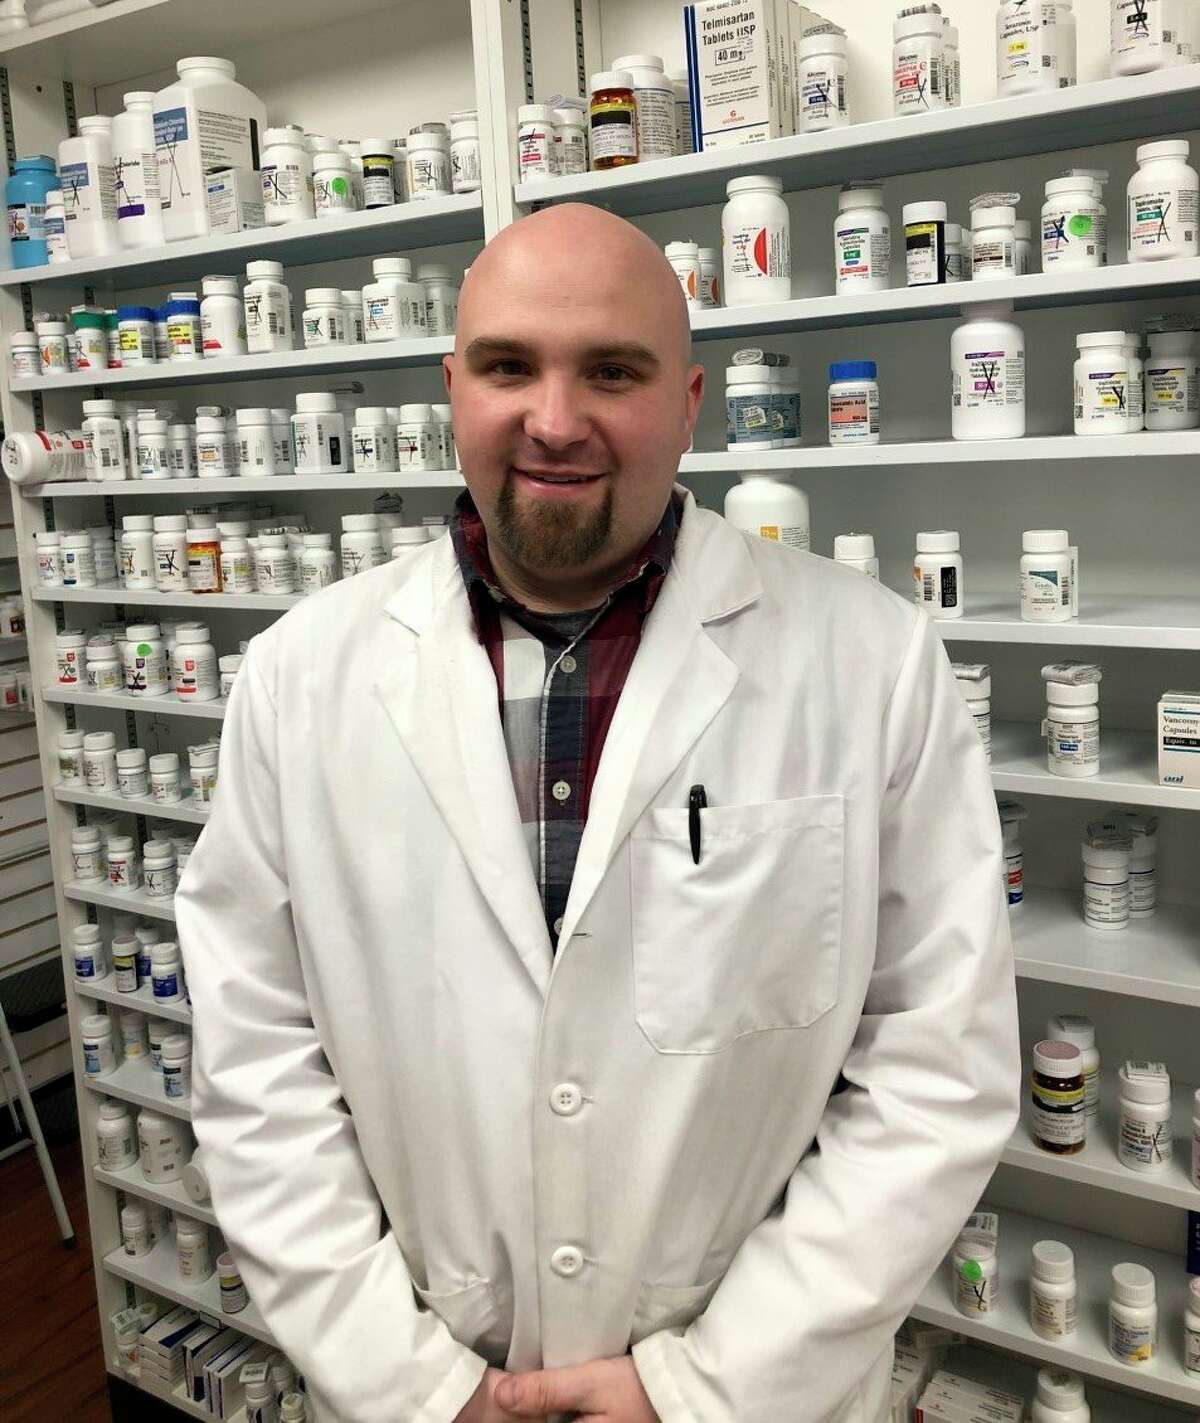 Pharmacist Brent Beemer, with Canadian Lakes Pharmacy in Stanwood, said it is important the business stays open at this time to continue to keep area residents healthy and provide them with the medications they need. (Courtesy photo)